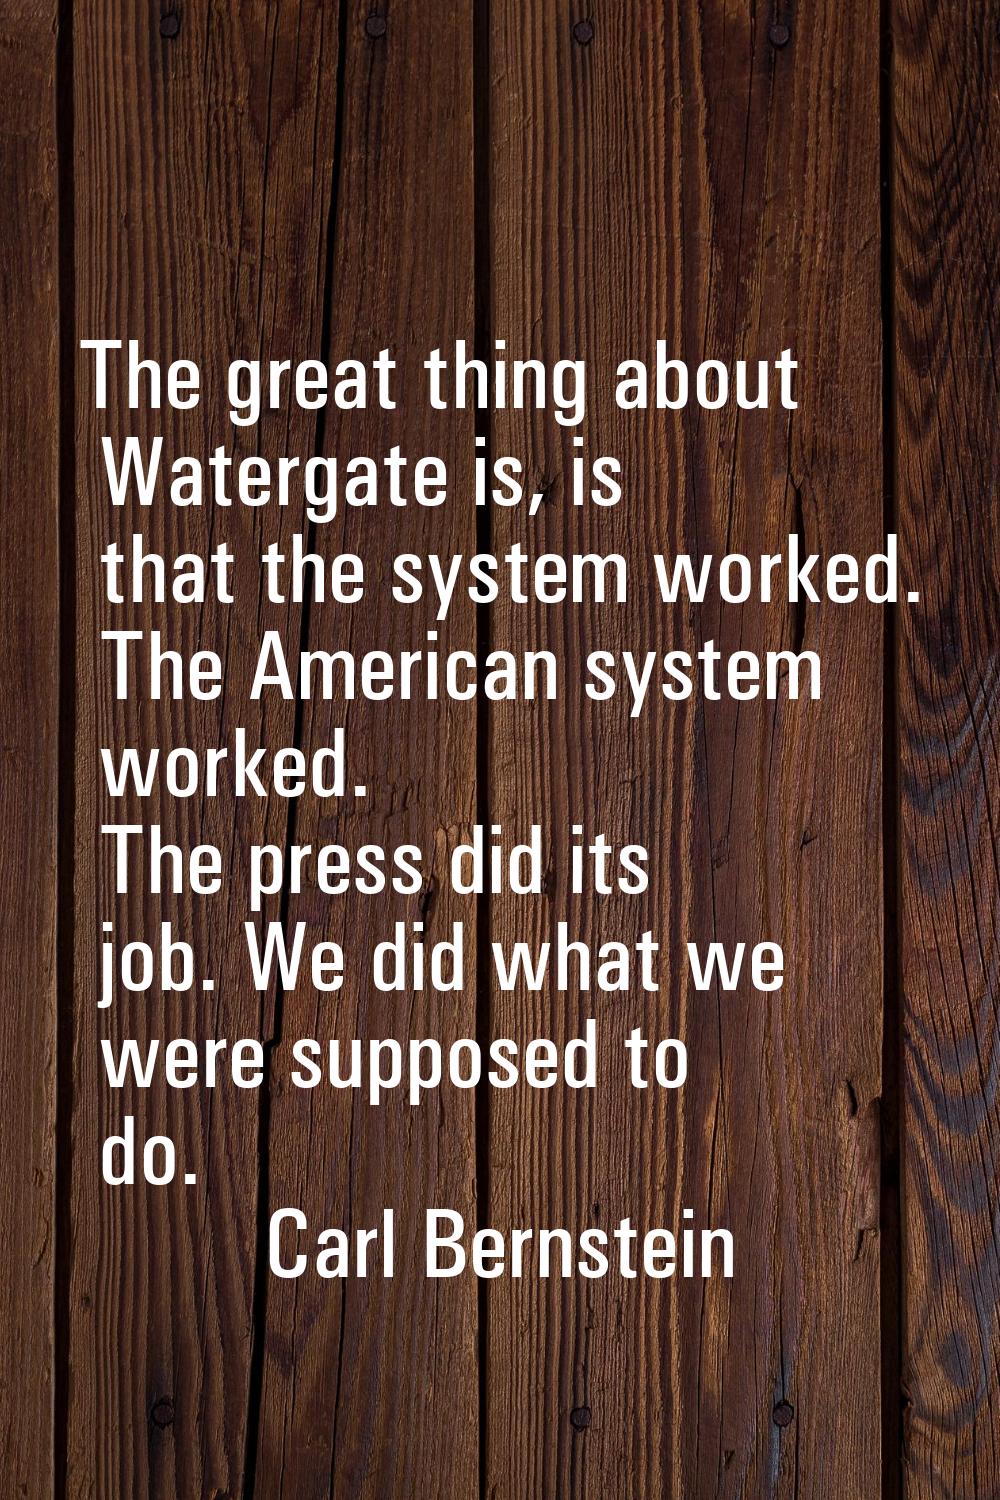 The great thing about Watergate is, is that the system worked. The American system worked. The pres